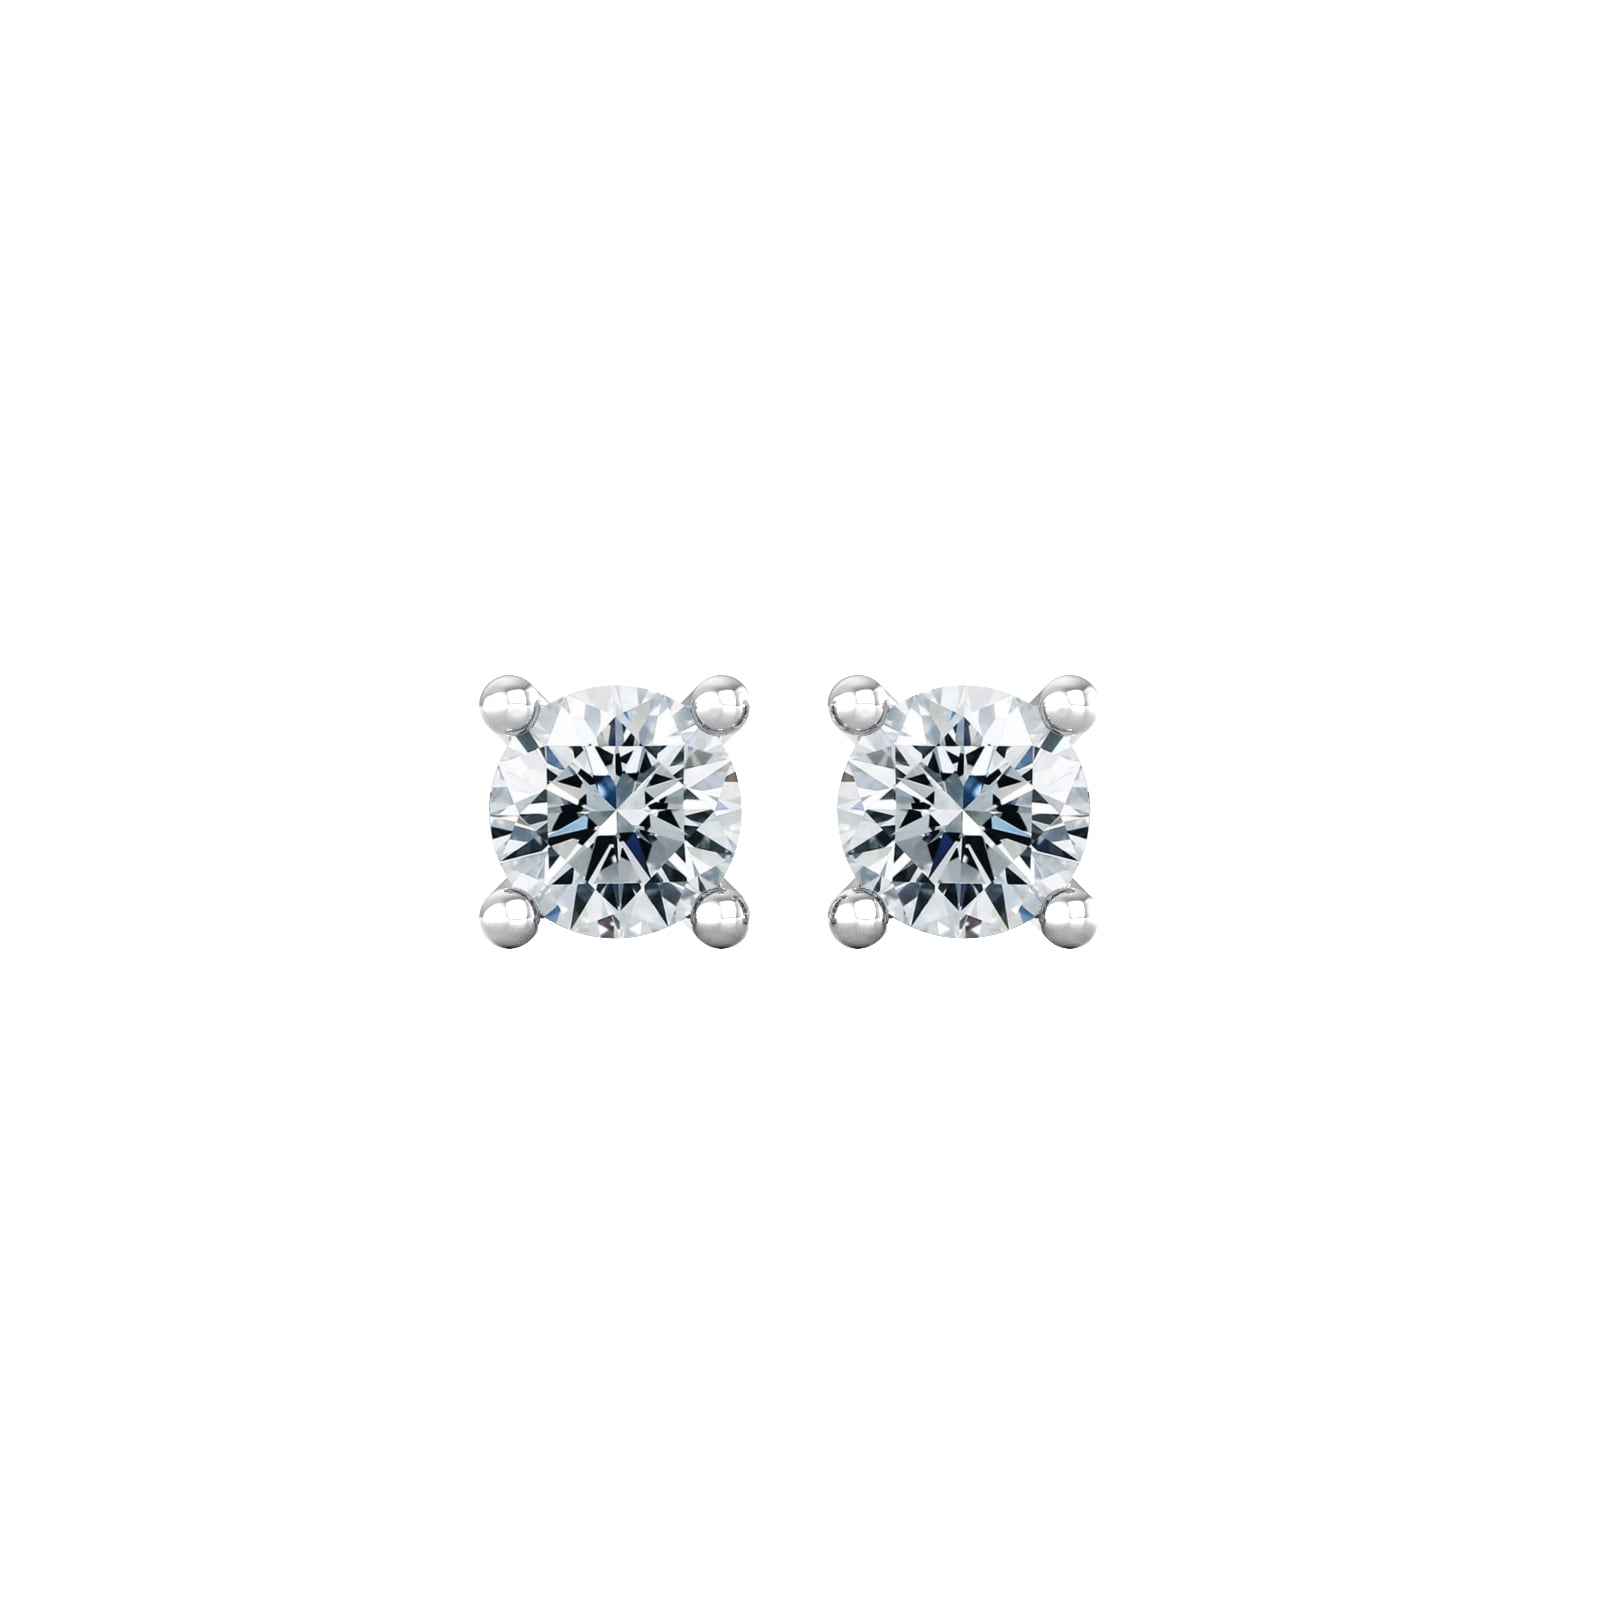 18ct White Gold 0.25cttw Solitaire Diamond Stud Earrings